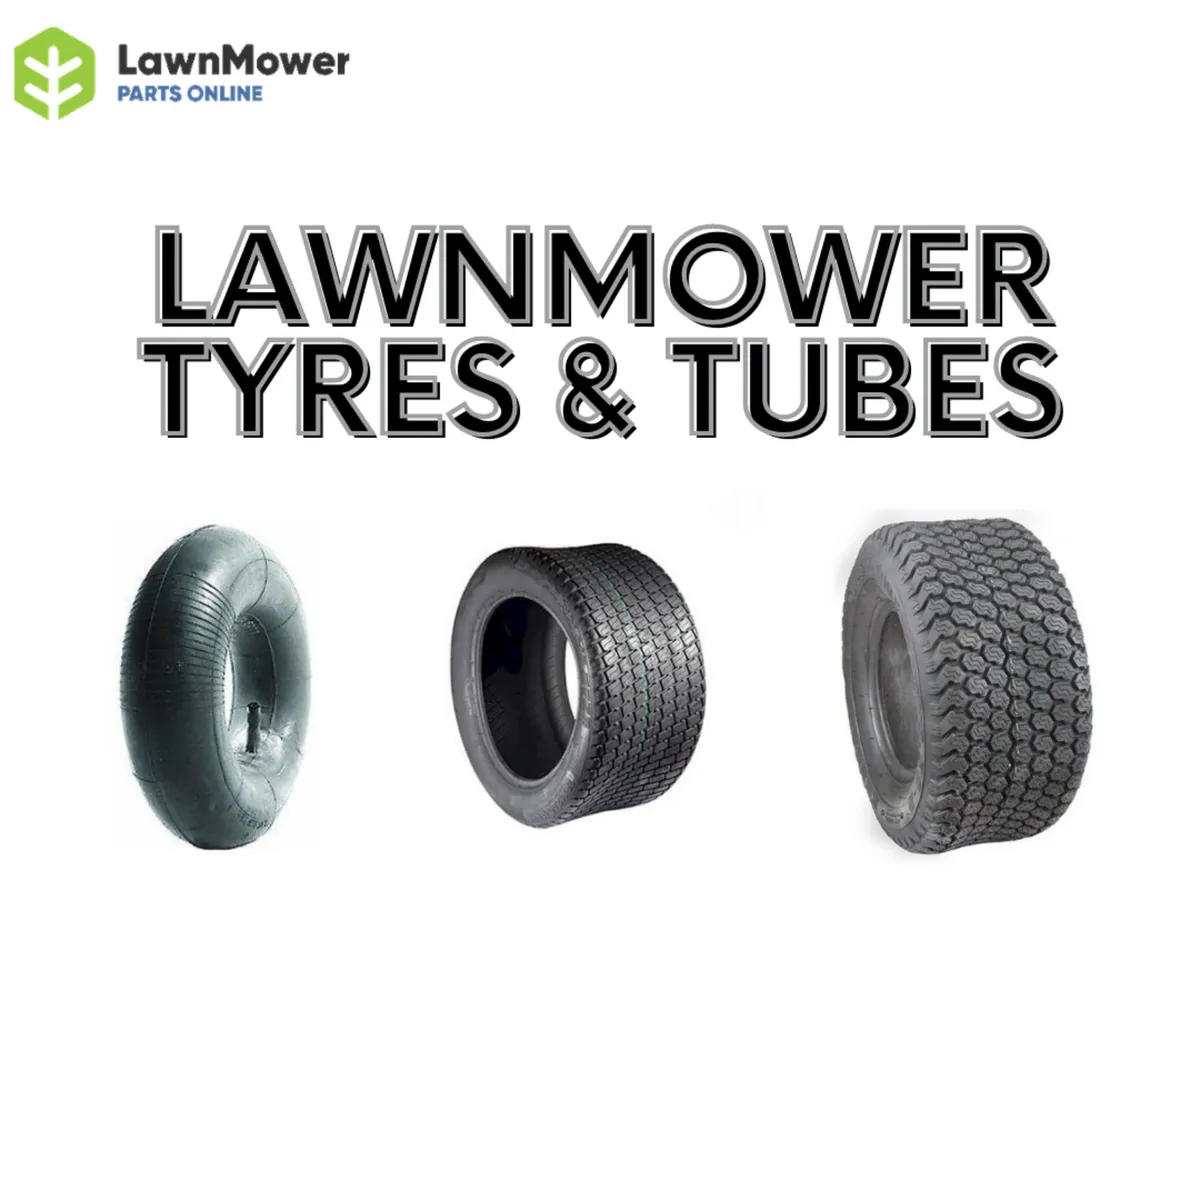 Lawnmower Tyres and Tubes